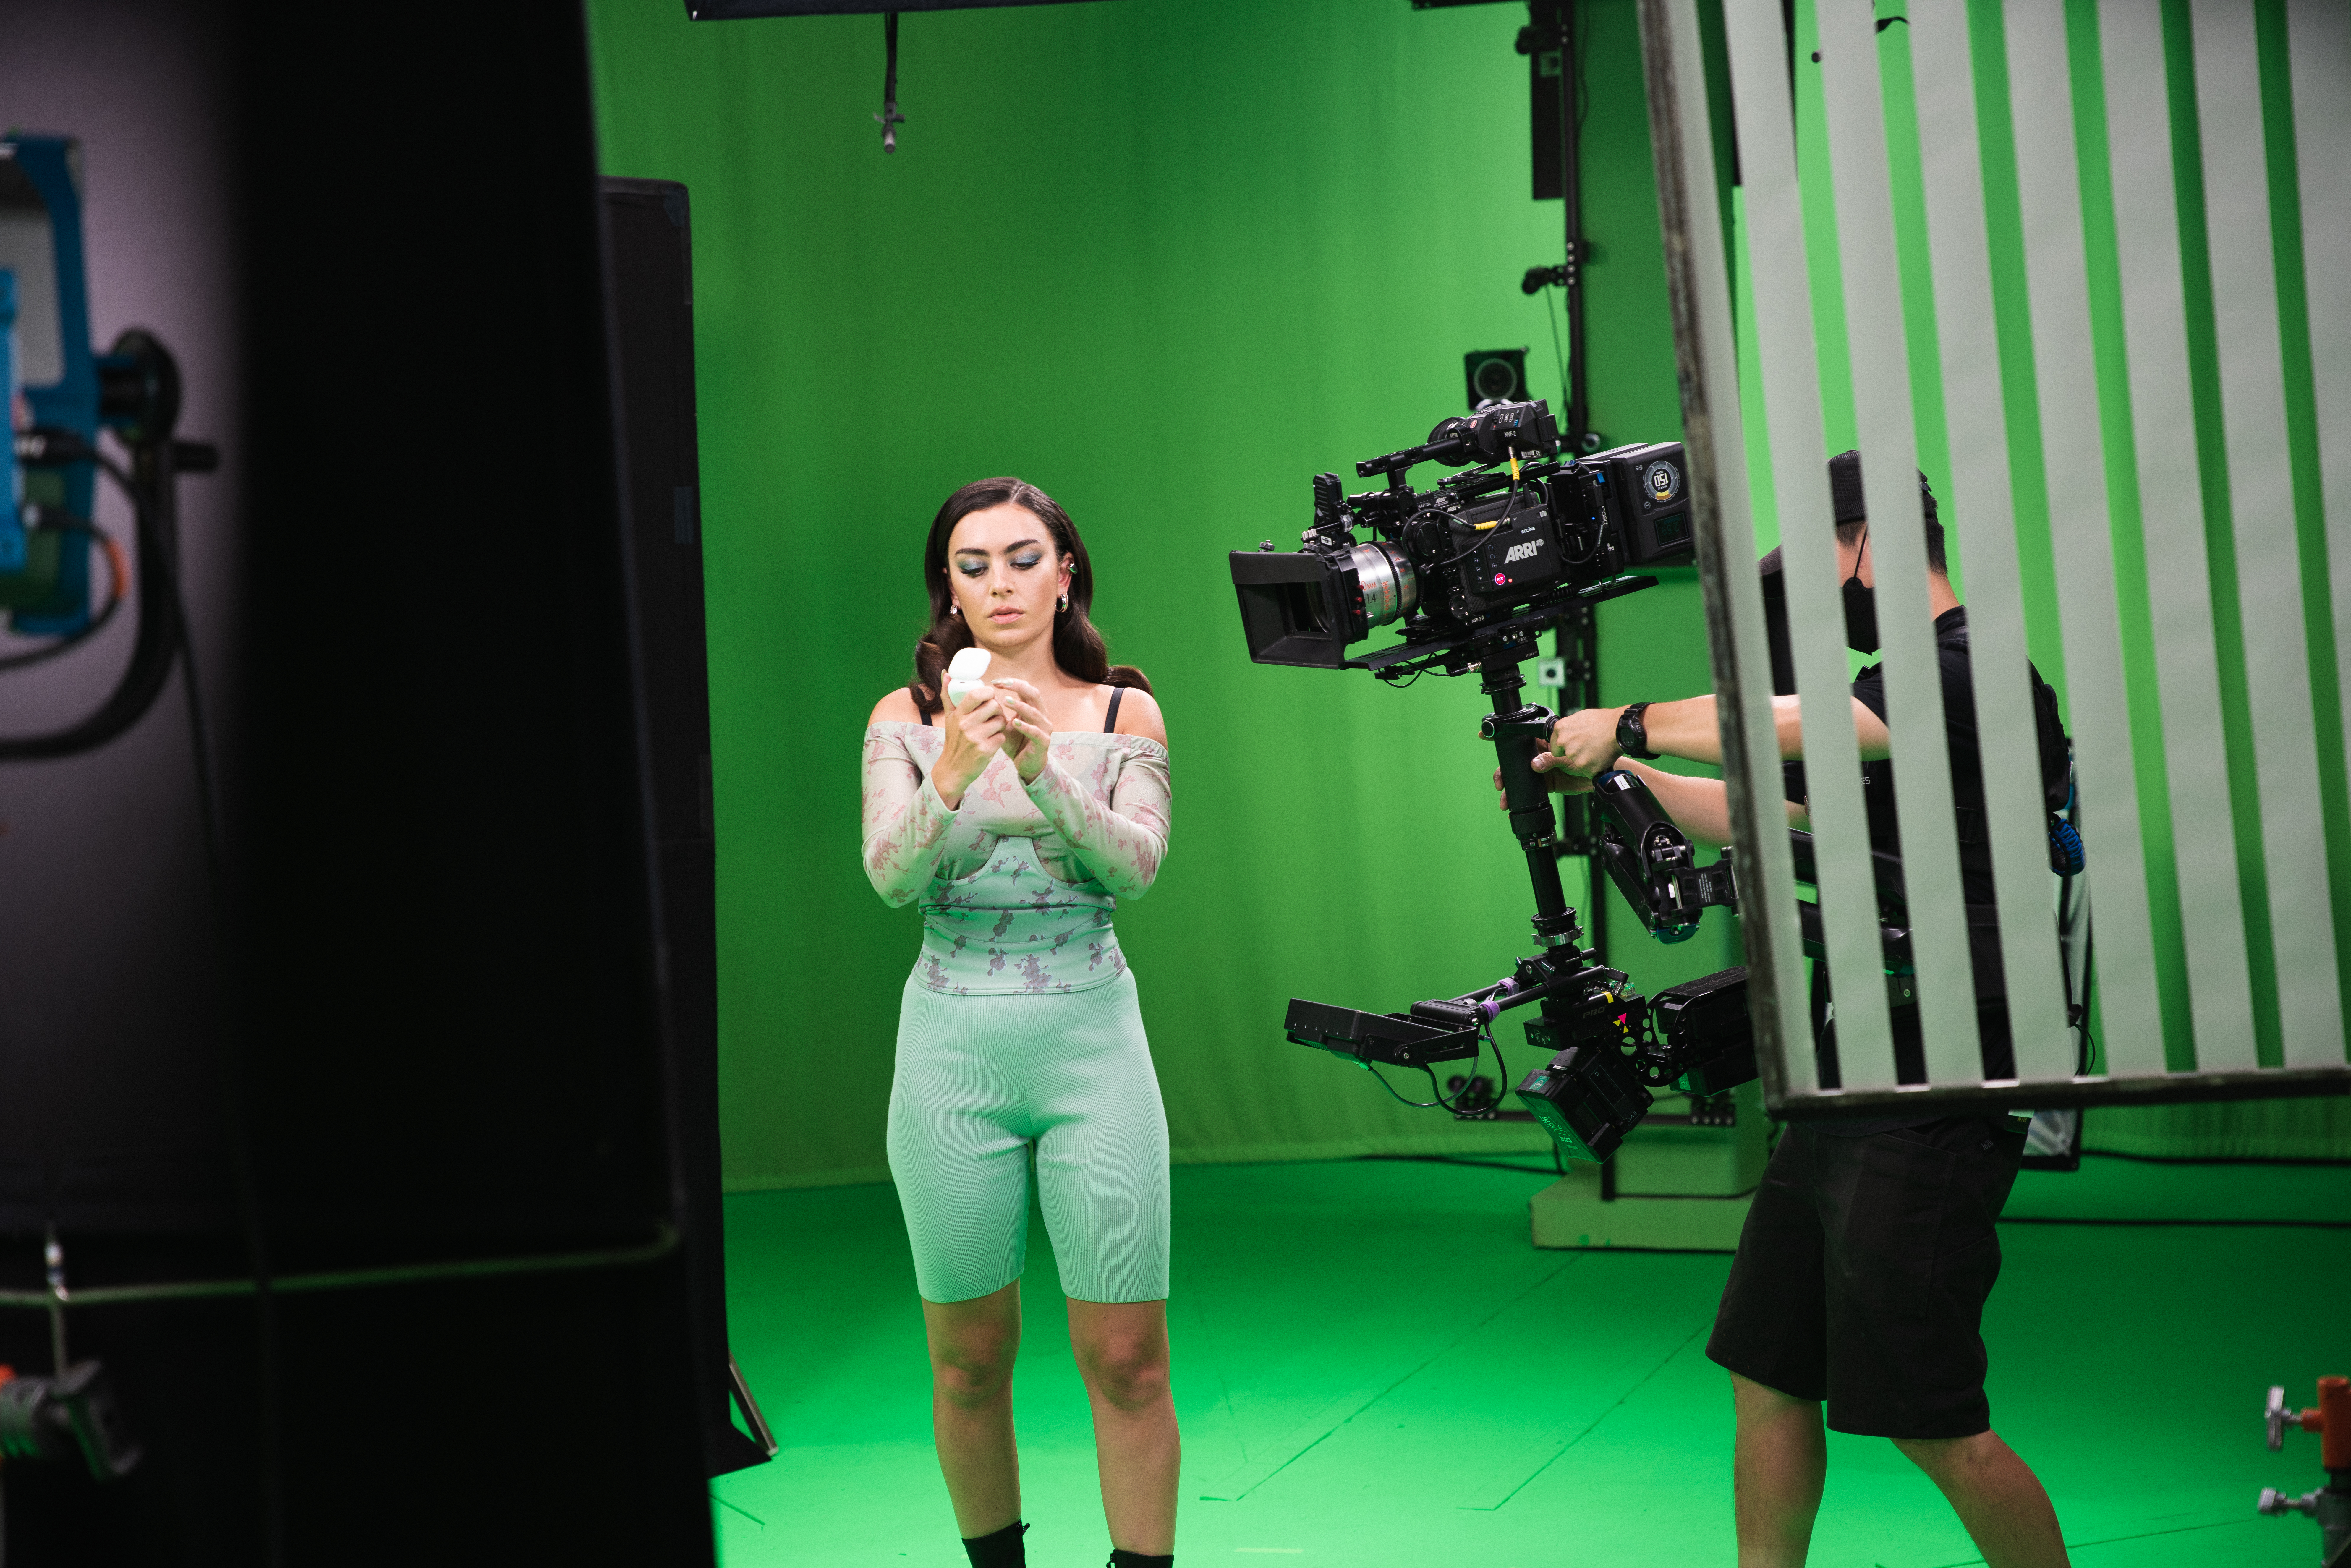 Galaxy Buds2 Employee Interview and Collaboration with Charli XCX